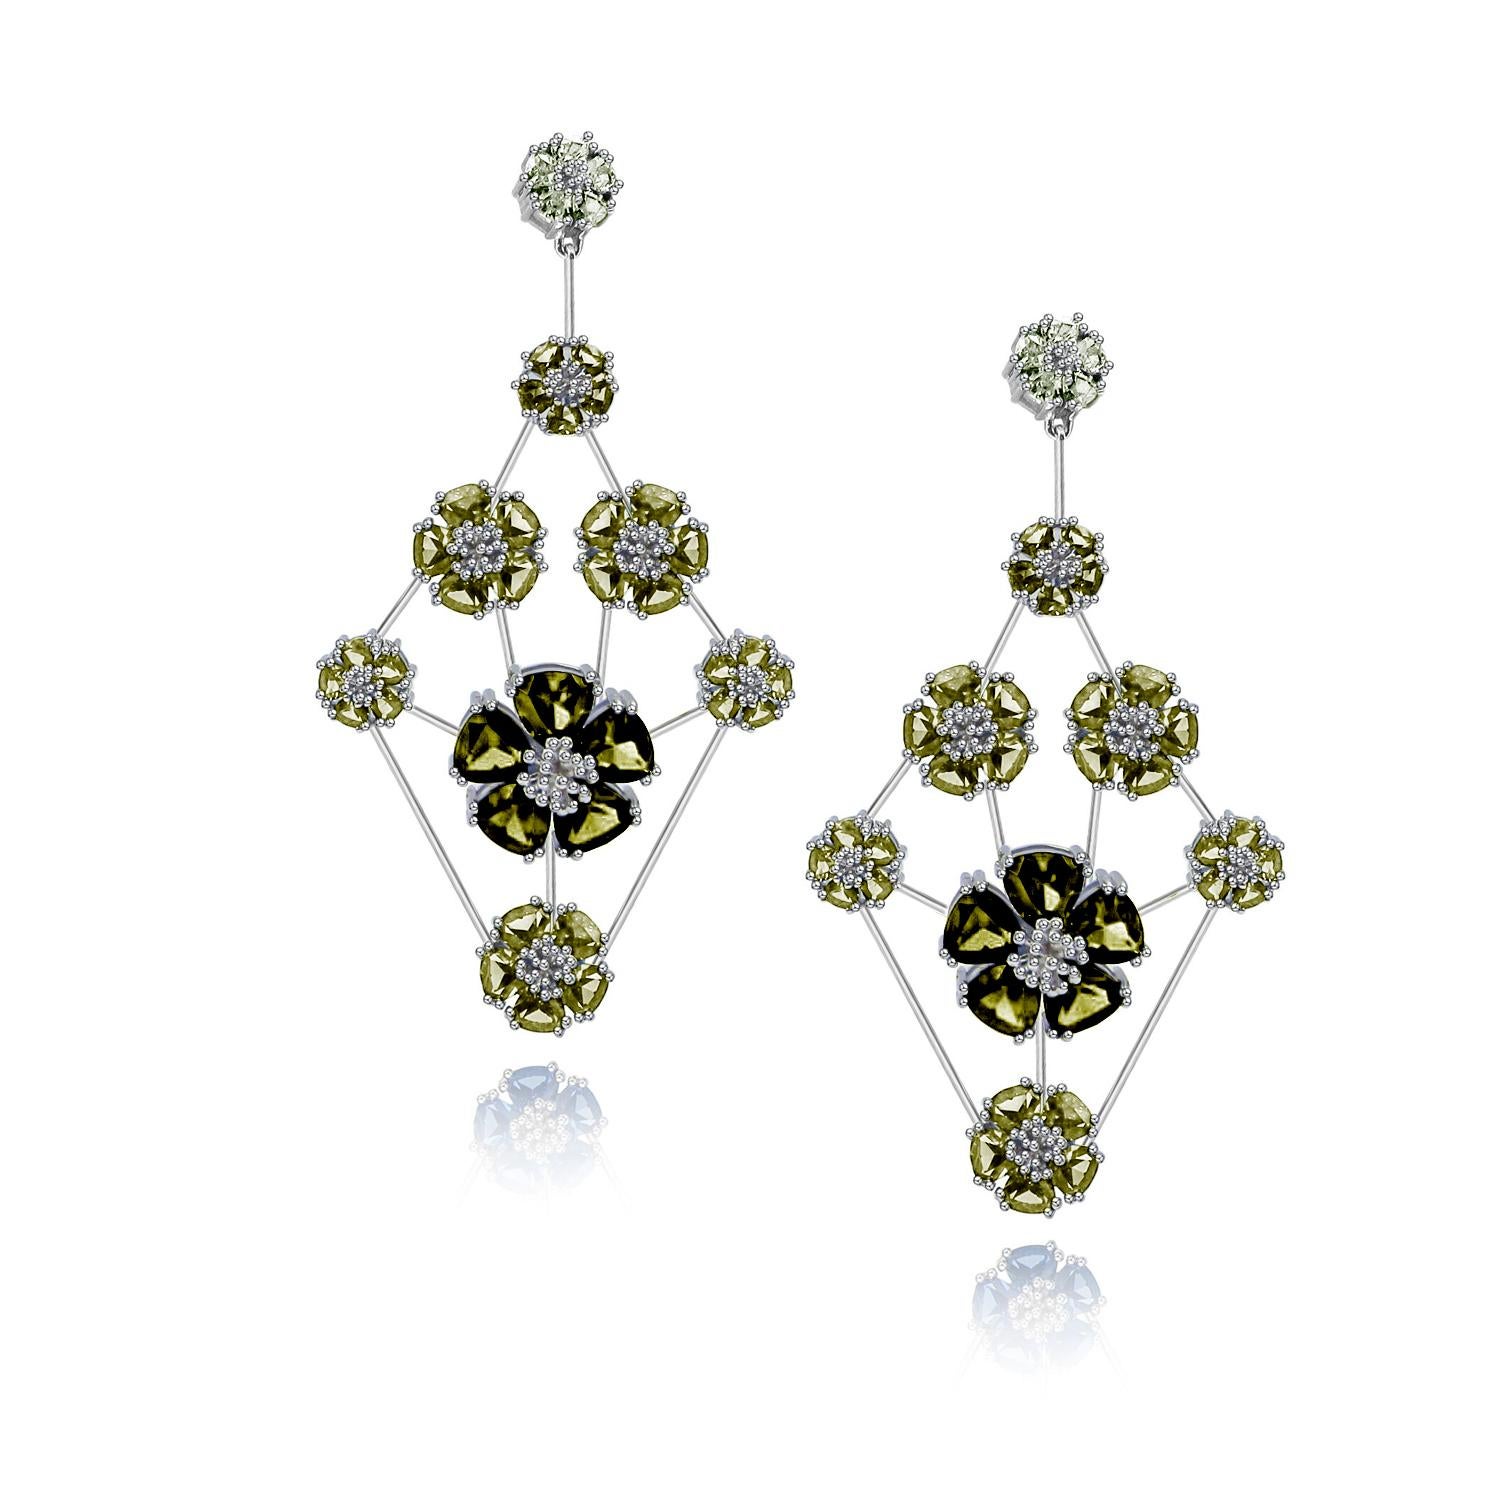 Trillion Cut White Topaz, Gray and Black Spinel Blossom Triple-Tier Chandelier Earrings For Sale